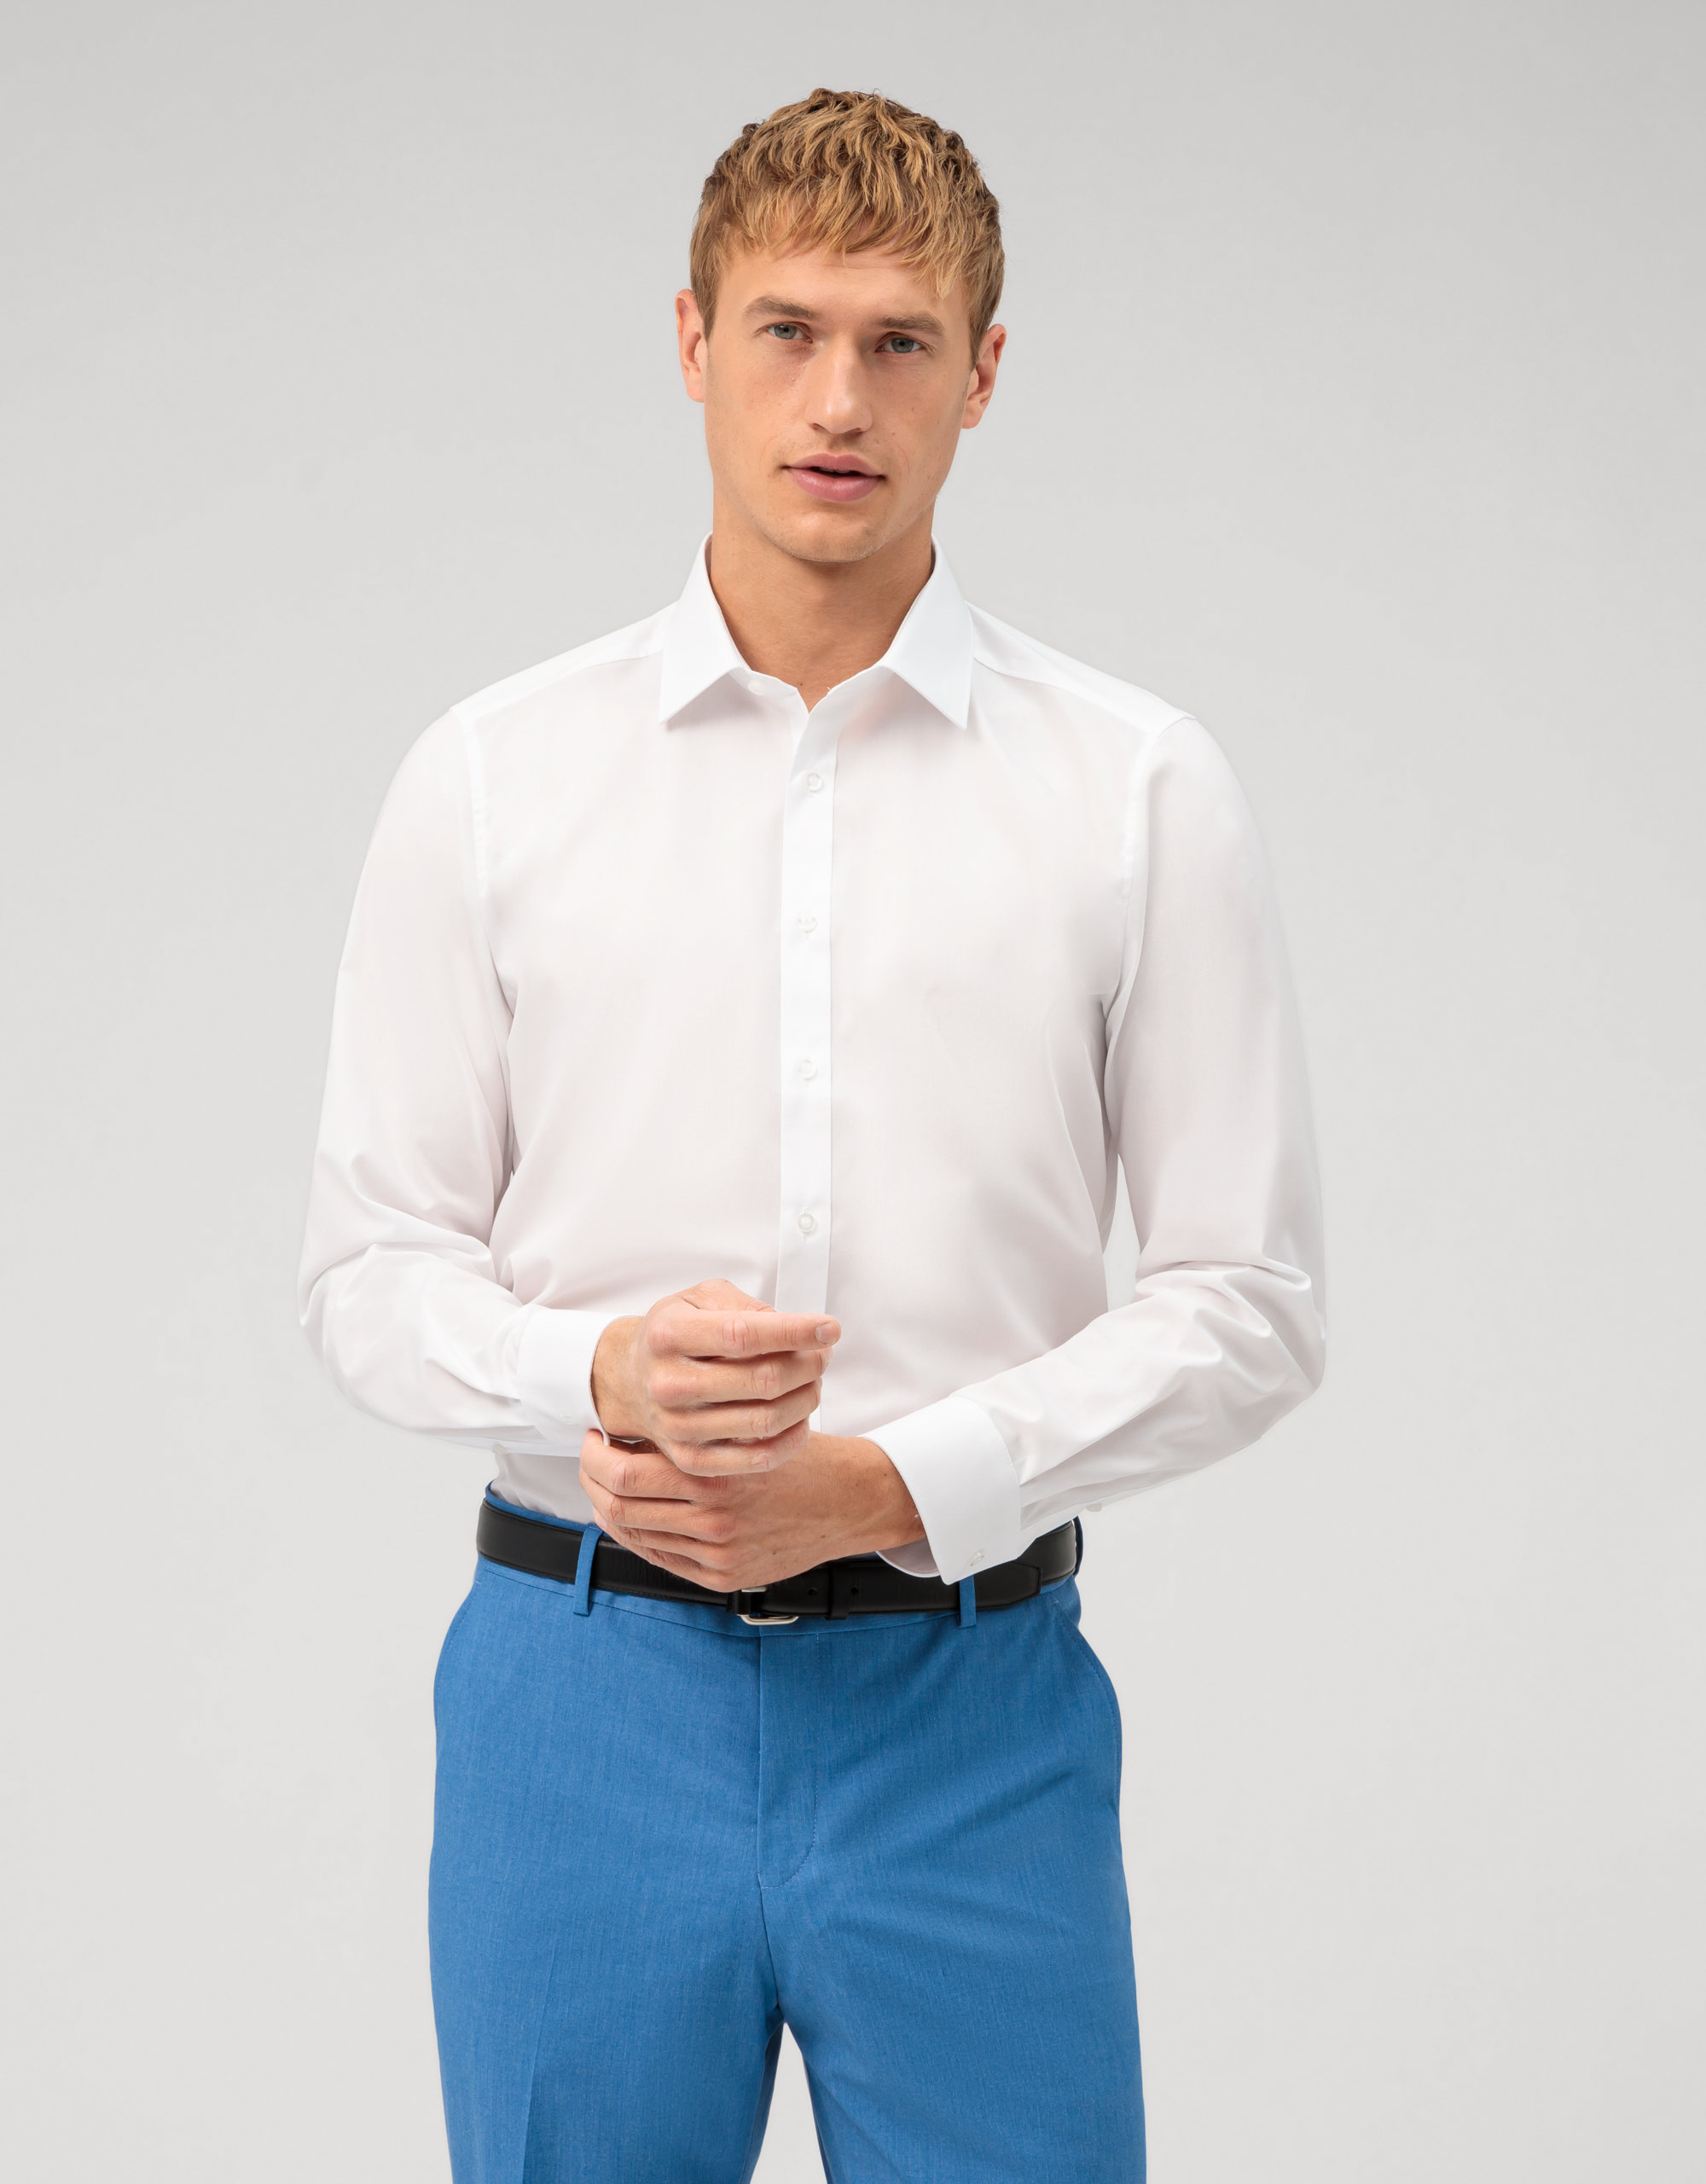 Business shirt | OLYMP Level Five, Kent fit, White - York New 60906900 body 